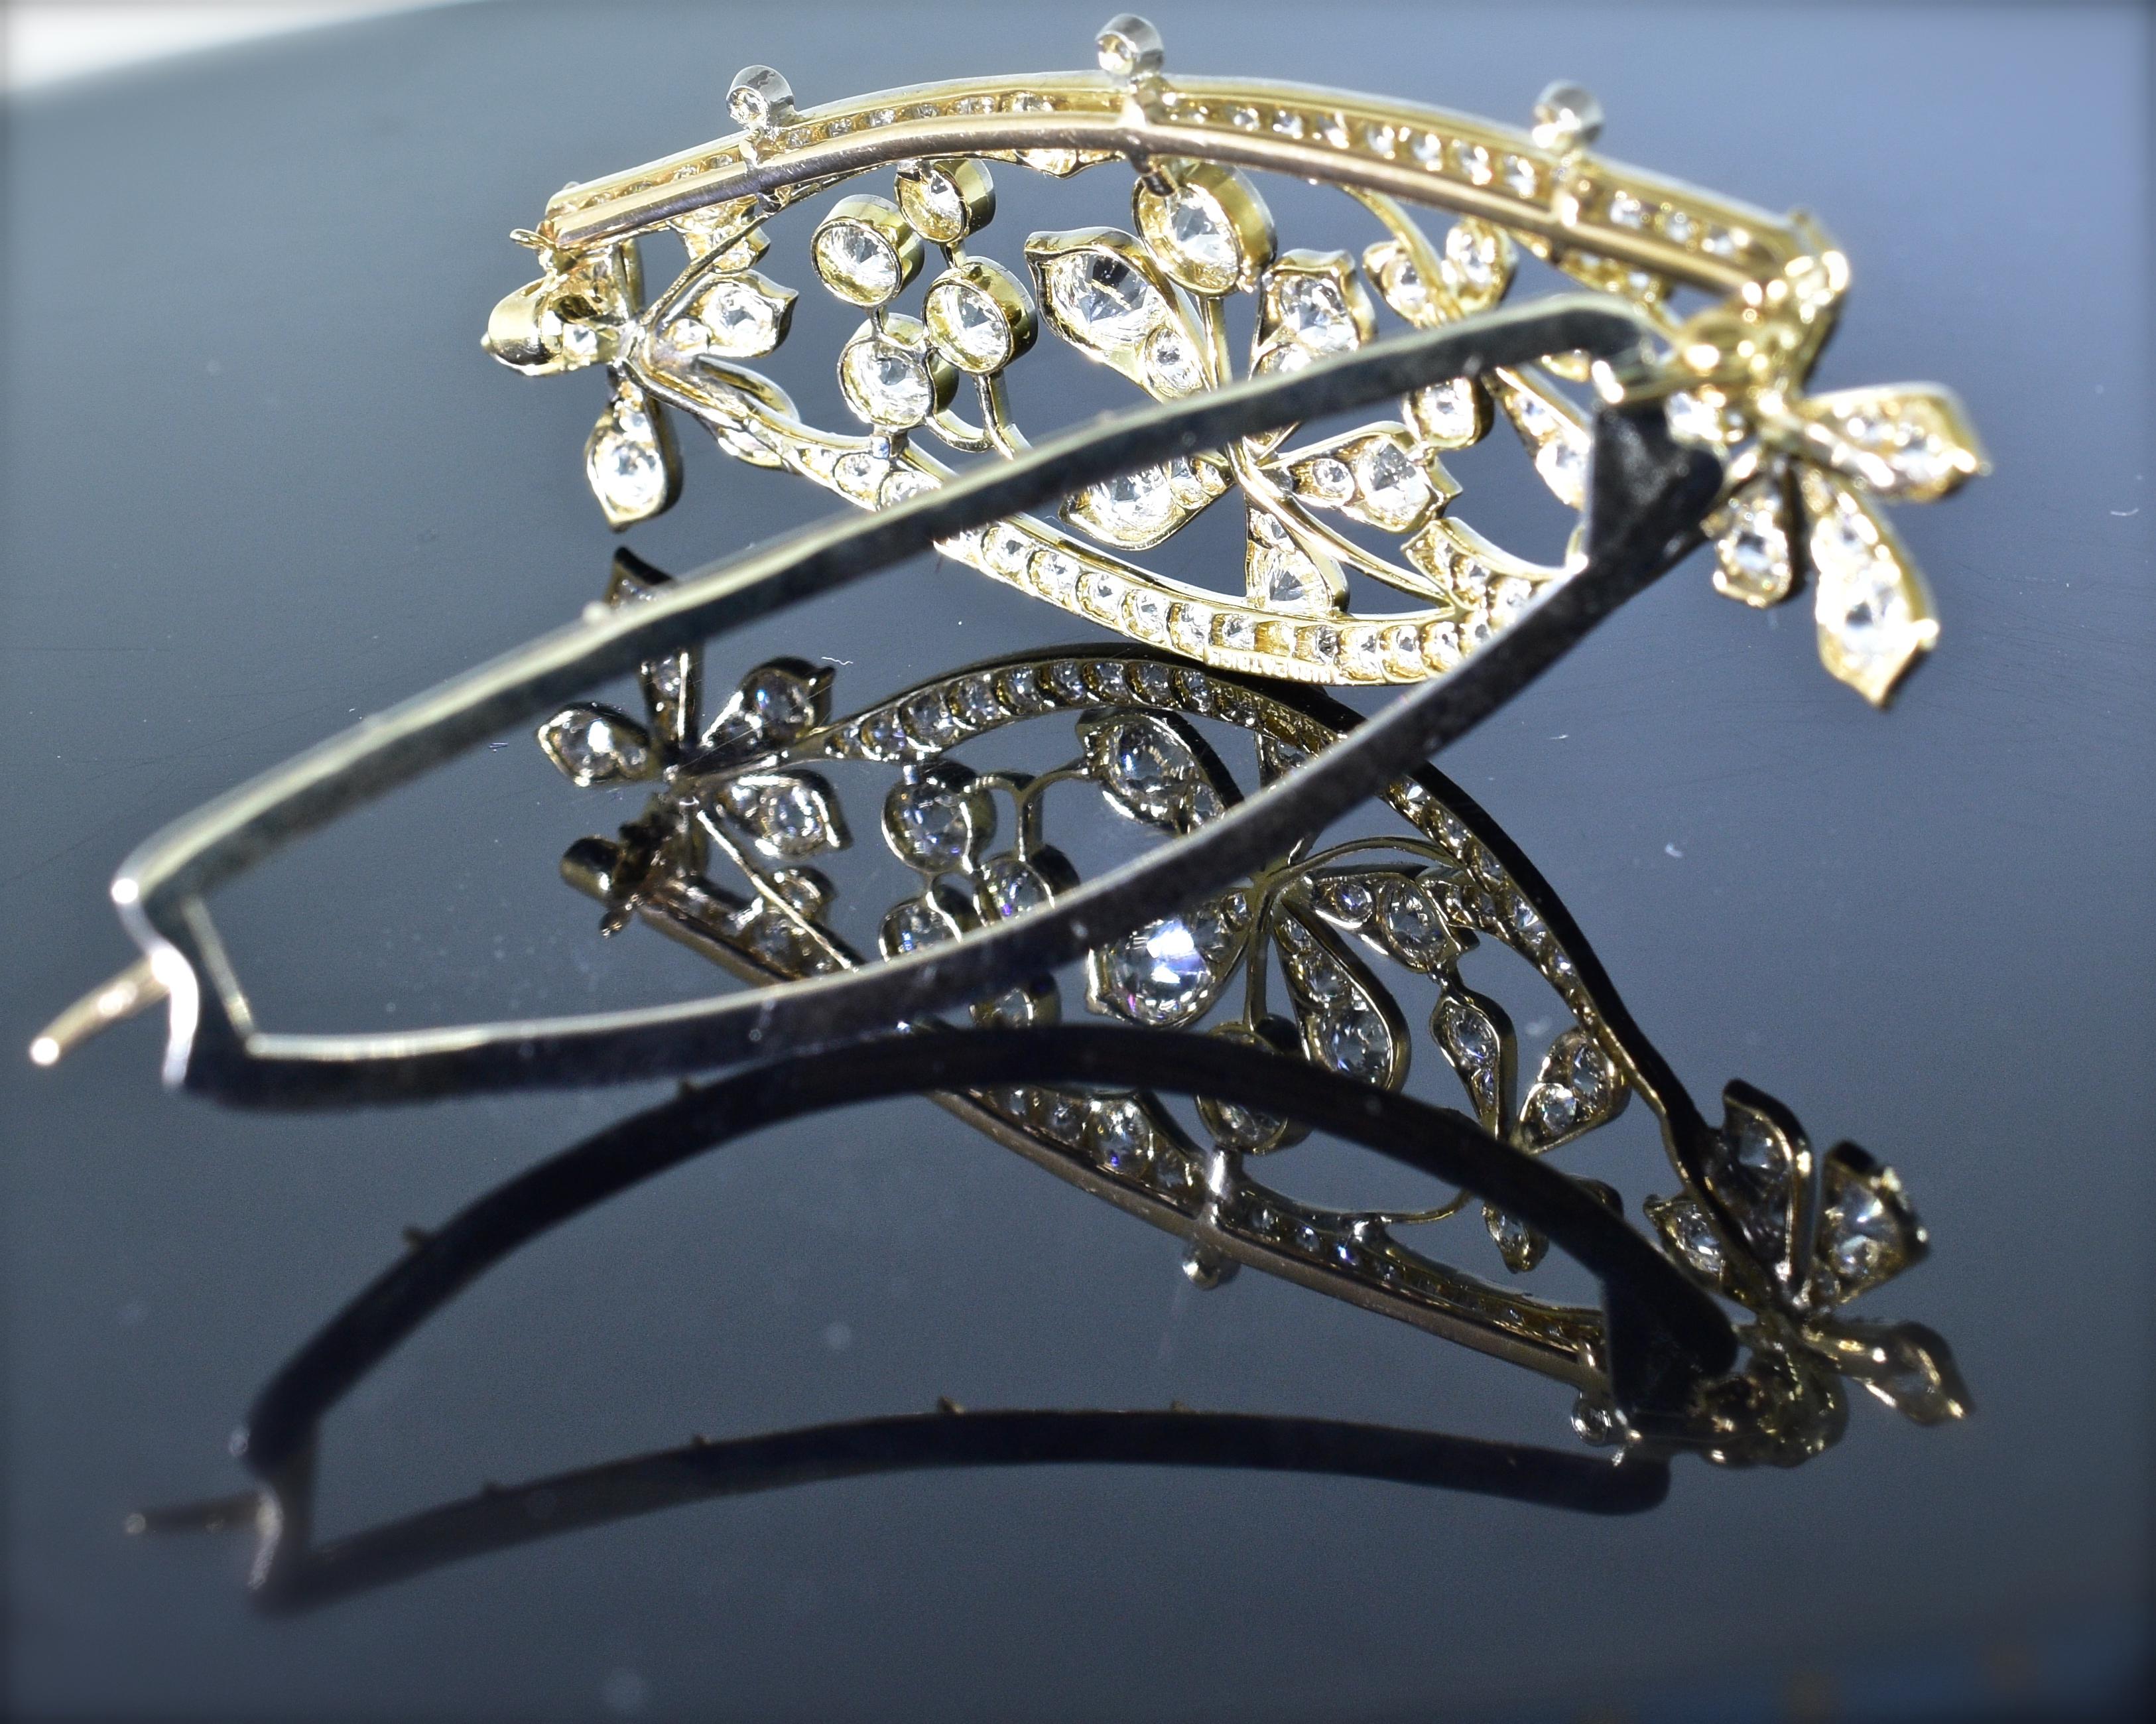 Barrette for the Hair, Platinum and Diamonds, circa 1895 by Kirkpatrick 2